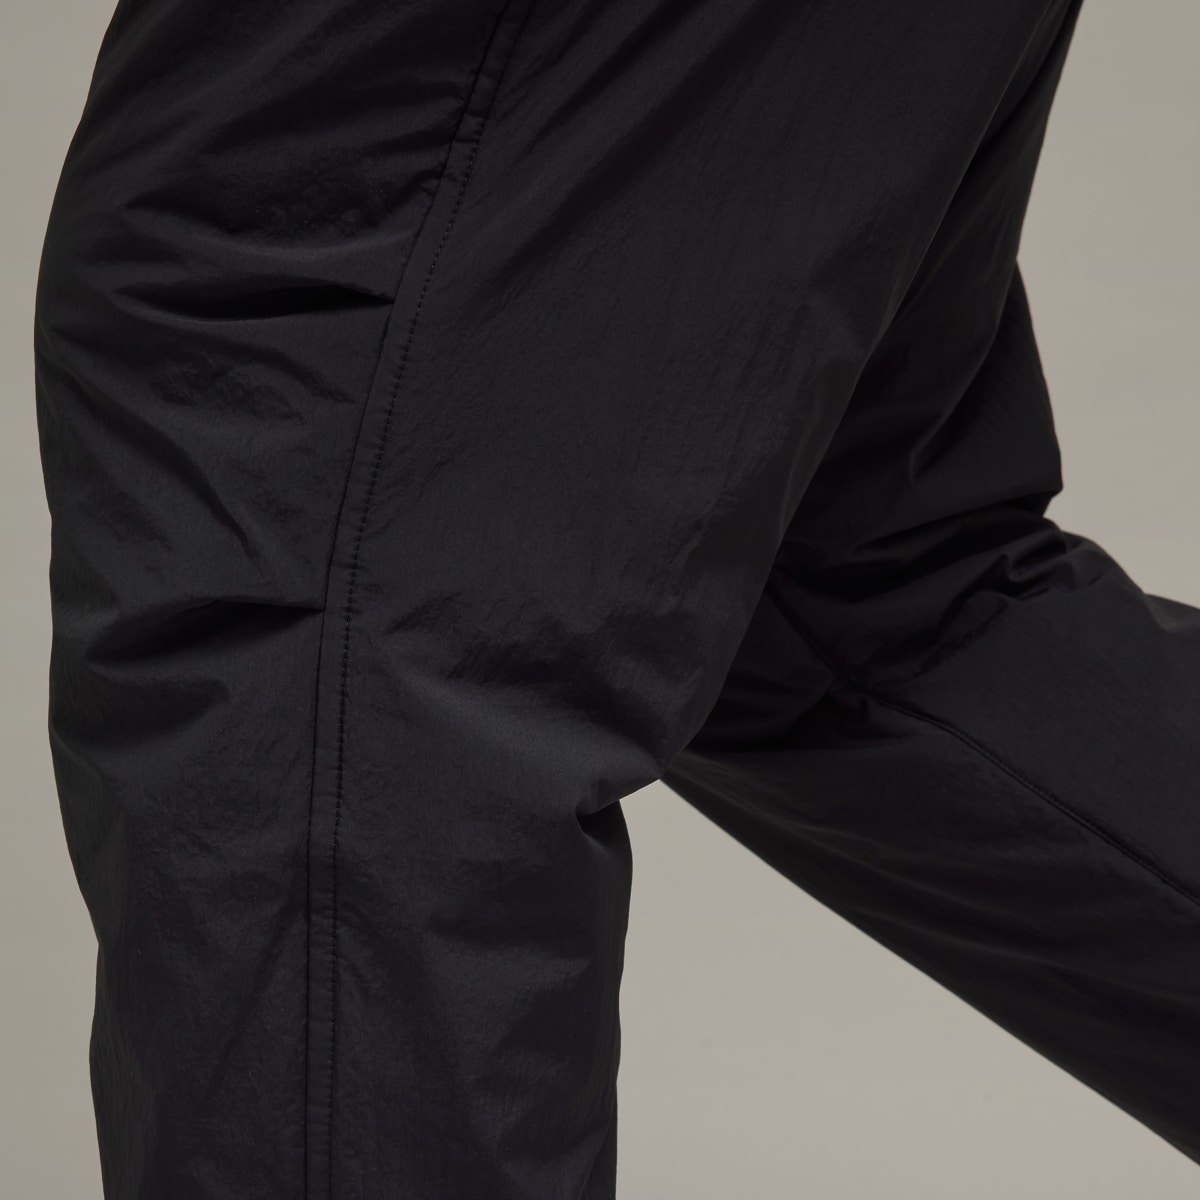 Adidas Y-3 Padded Tracksuit Bottoms. 8